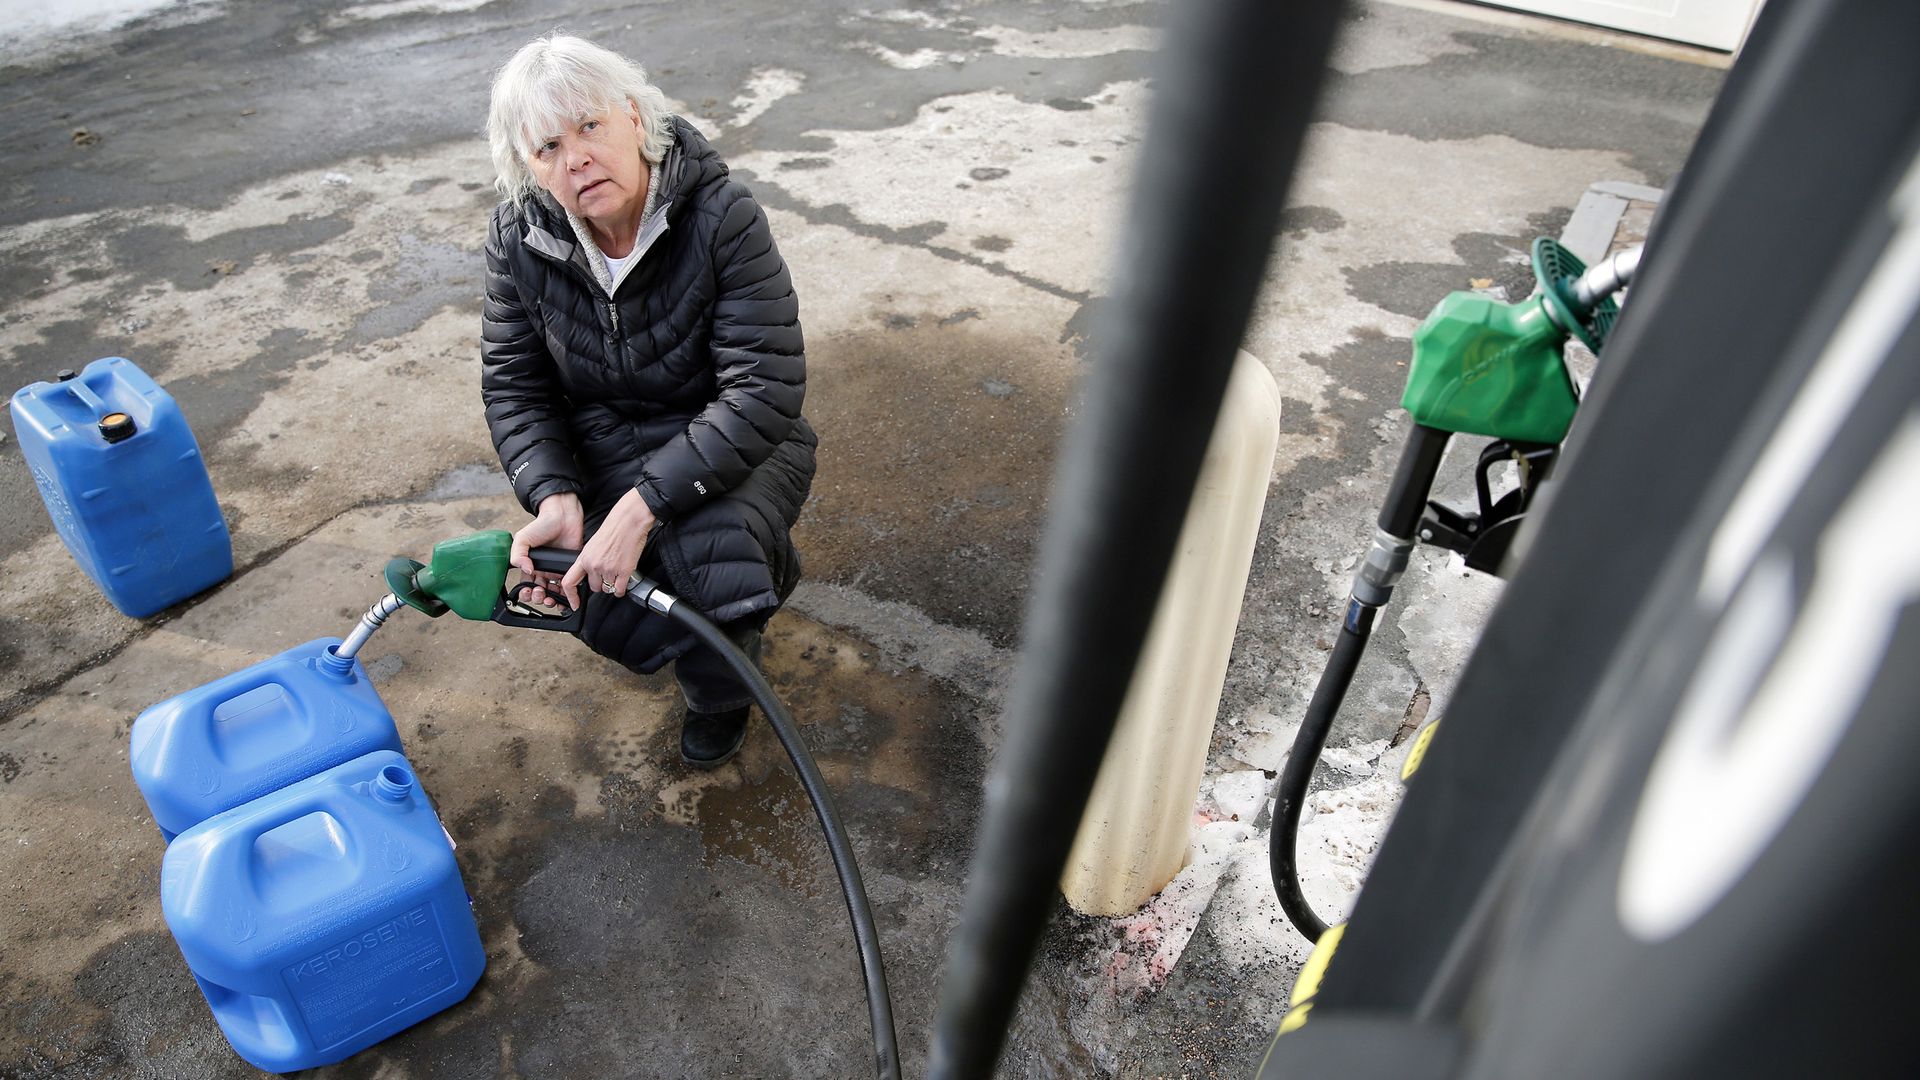 Lady with white hair crouches down filling three blue gasoline jugs with gasoline. 